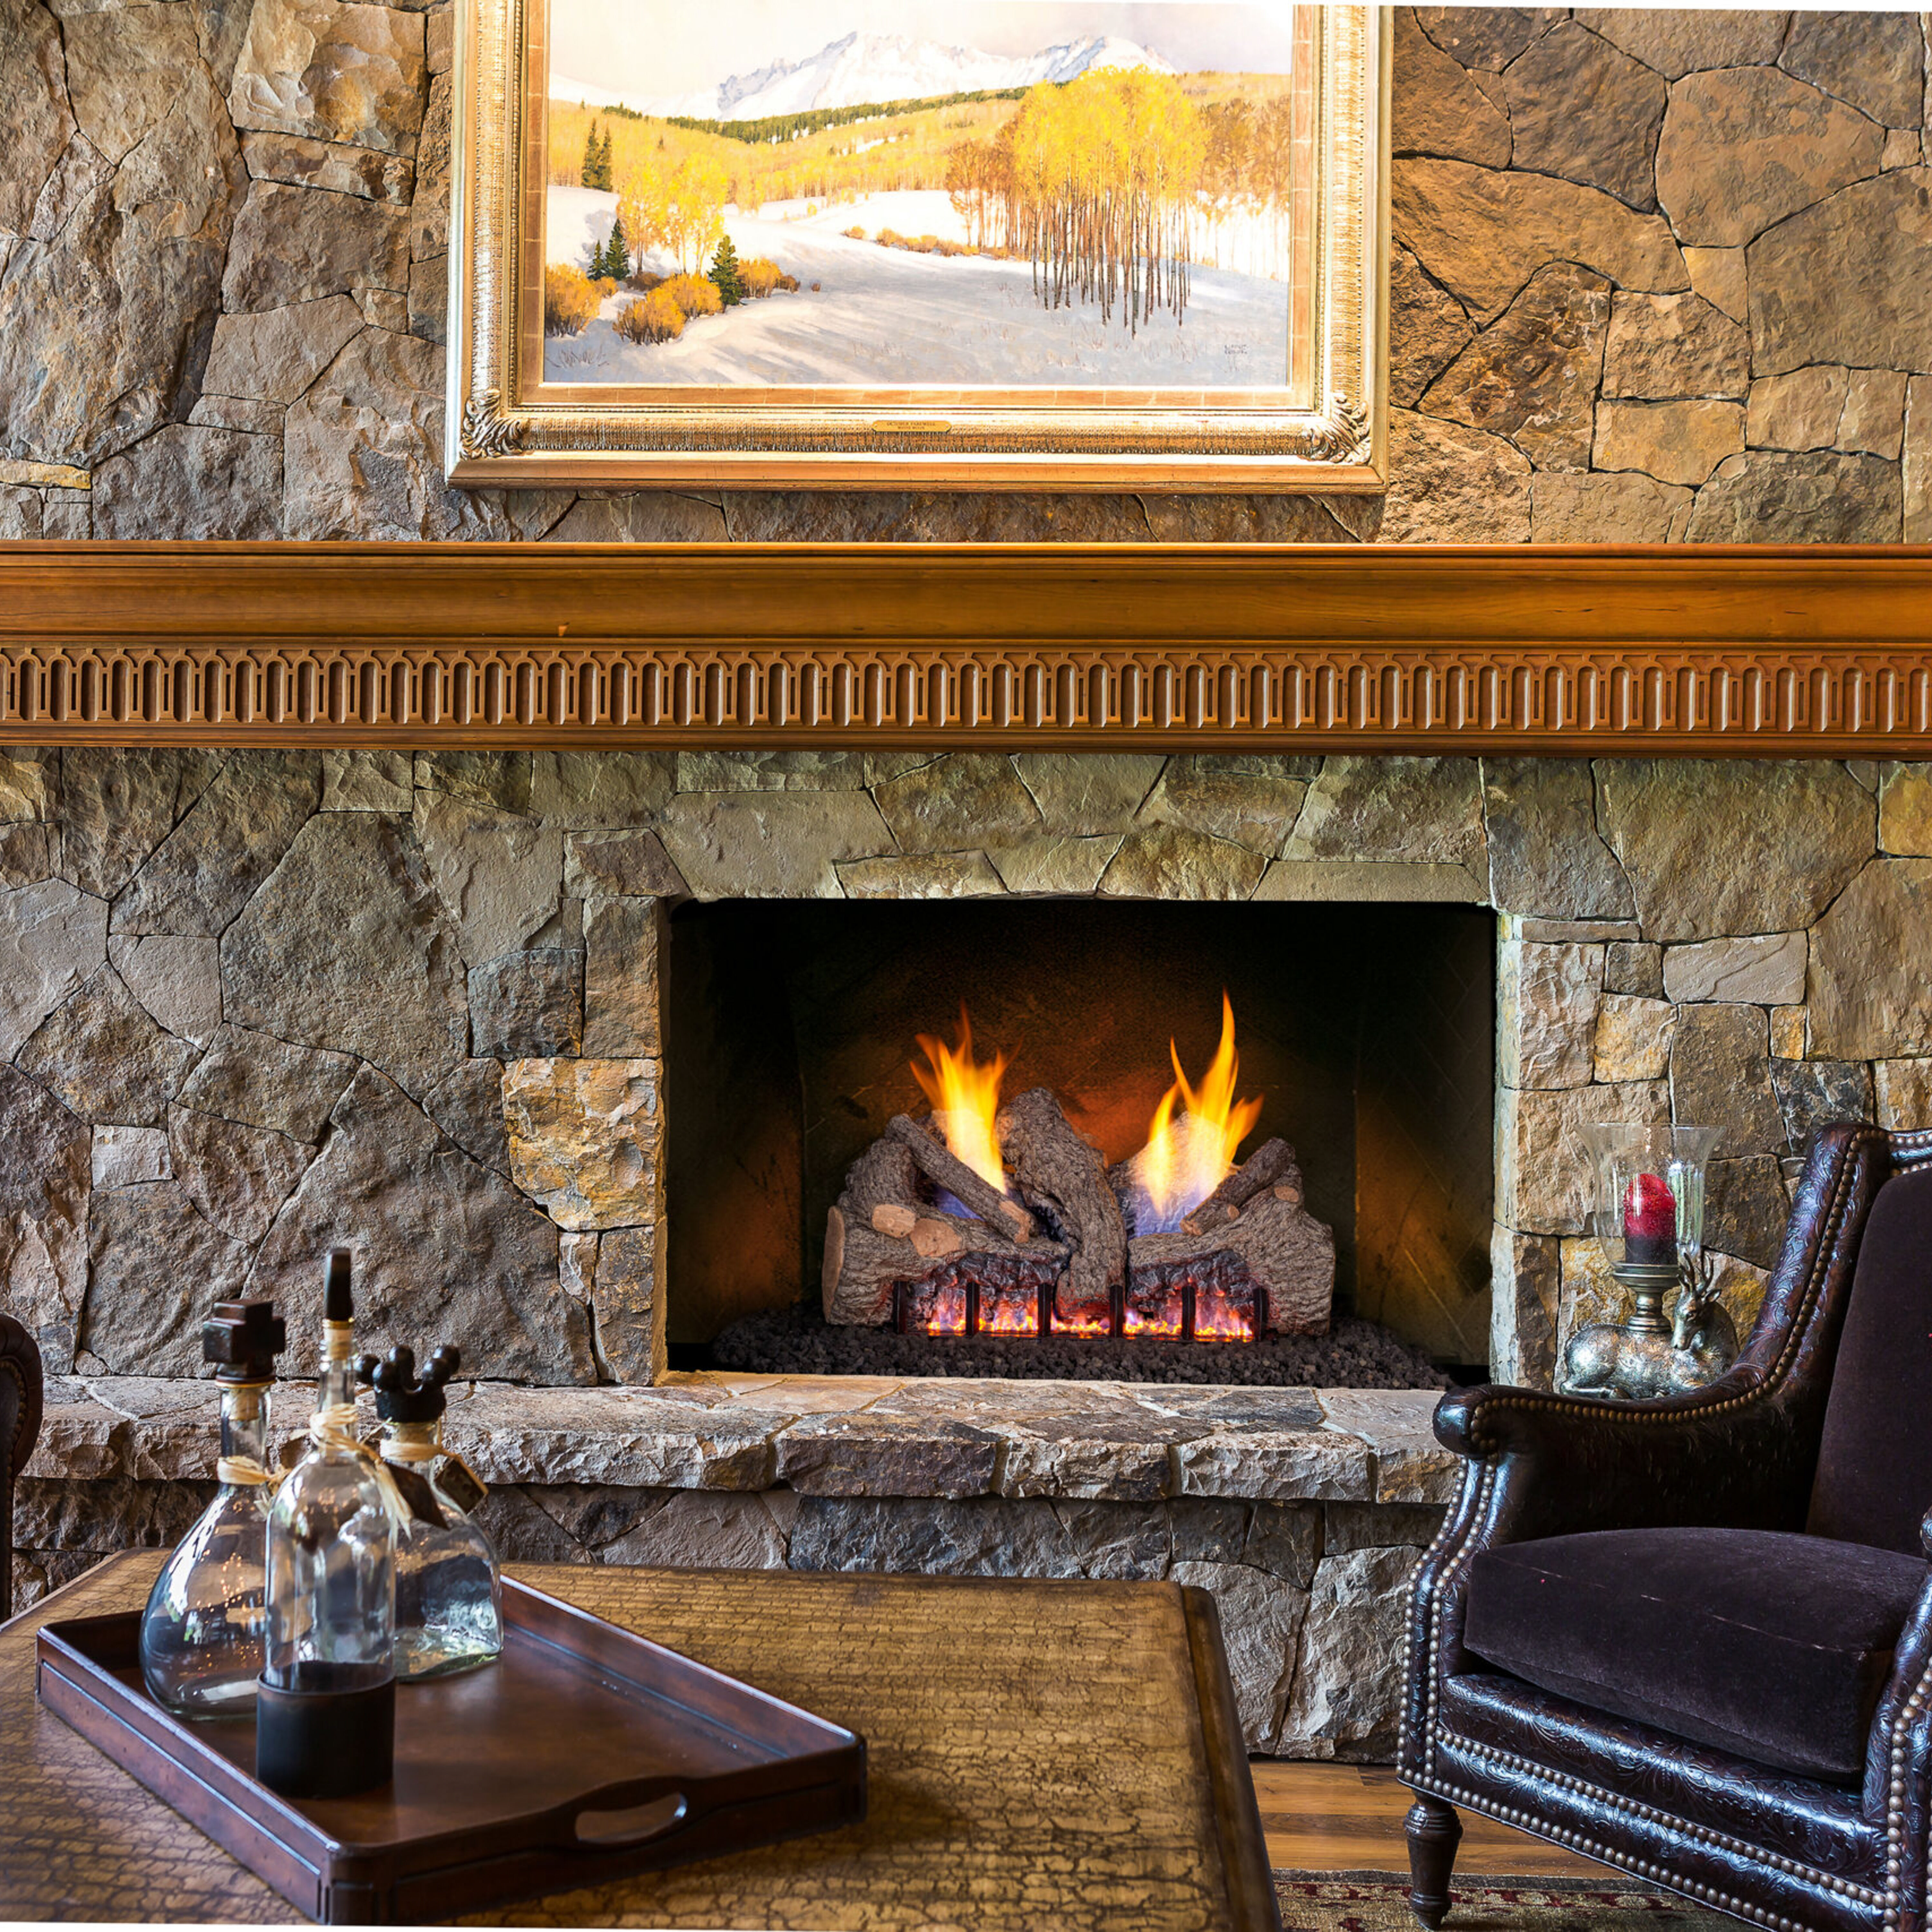 A rustic, traditional living room with a velvet decorative chair and wooden accents, along with a large, stone fireplace, a wooden mantel, and a Ventless gas log set.